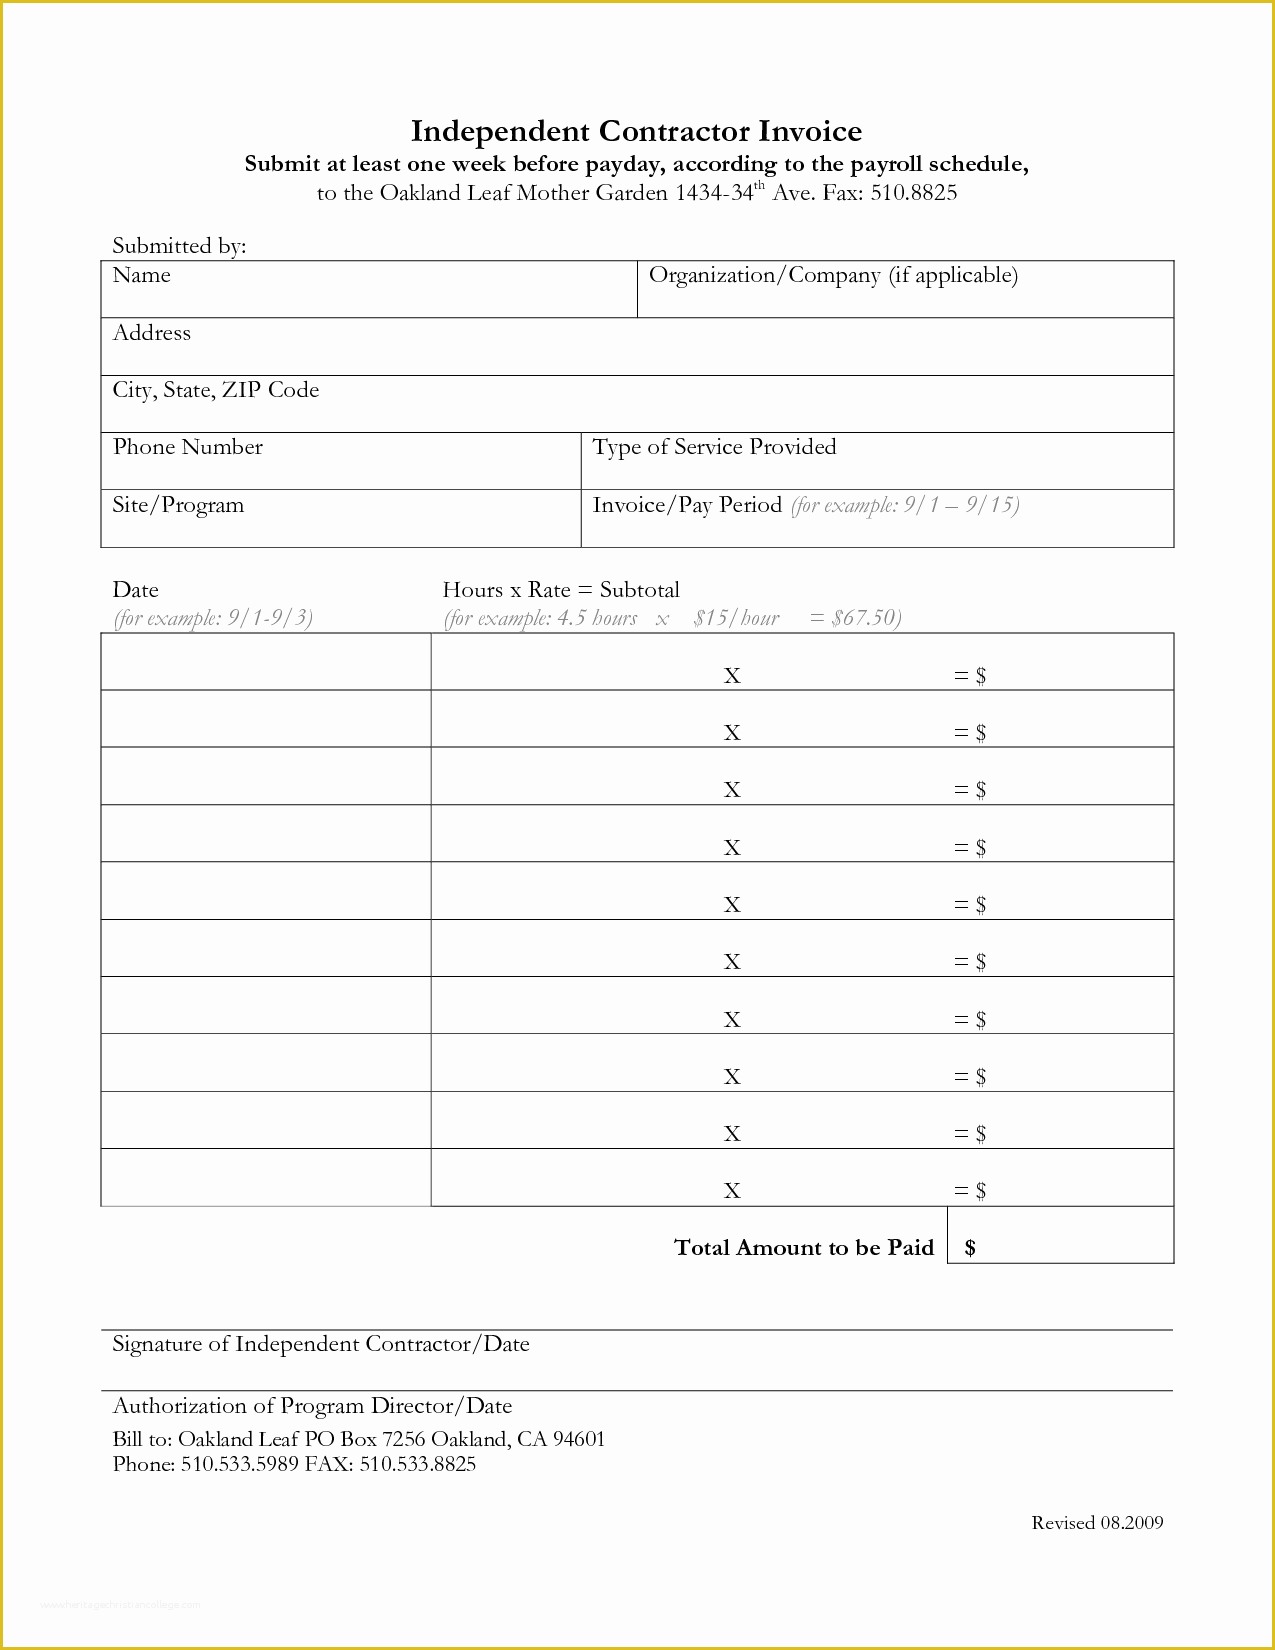 Independent Contractor Invoice Template Free Of Independent Contractor Invoice Template Free